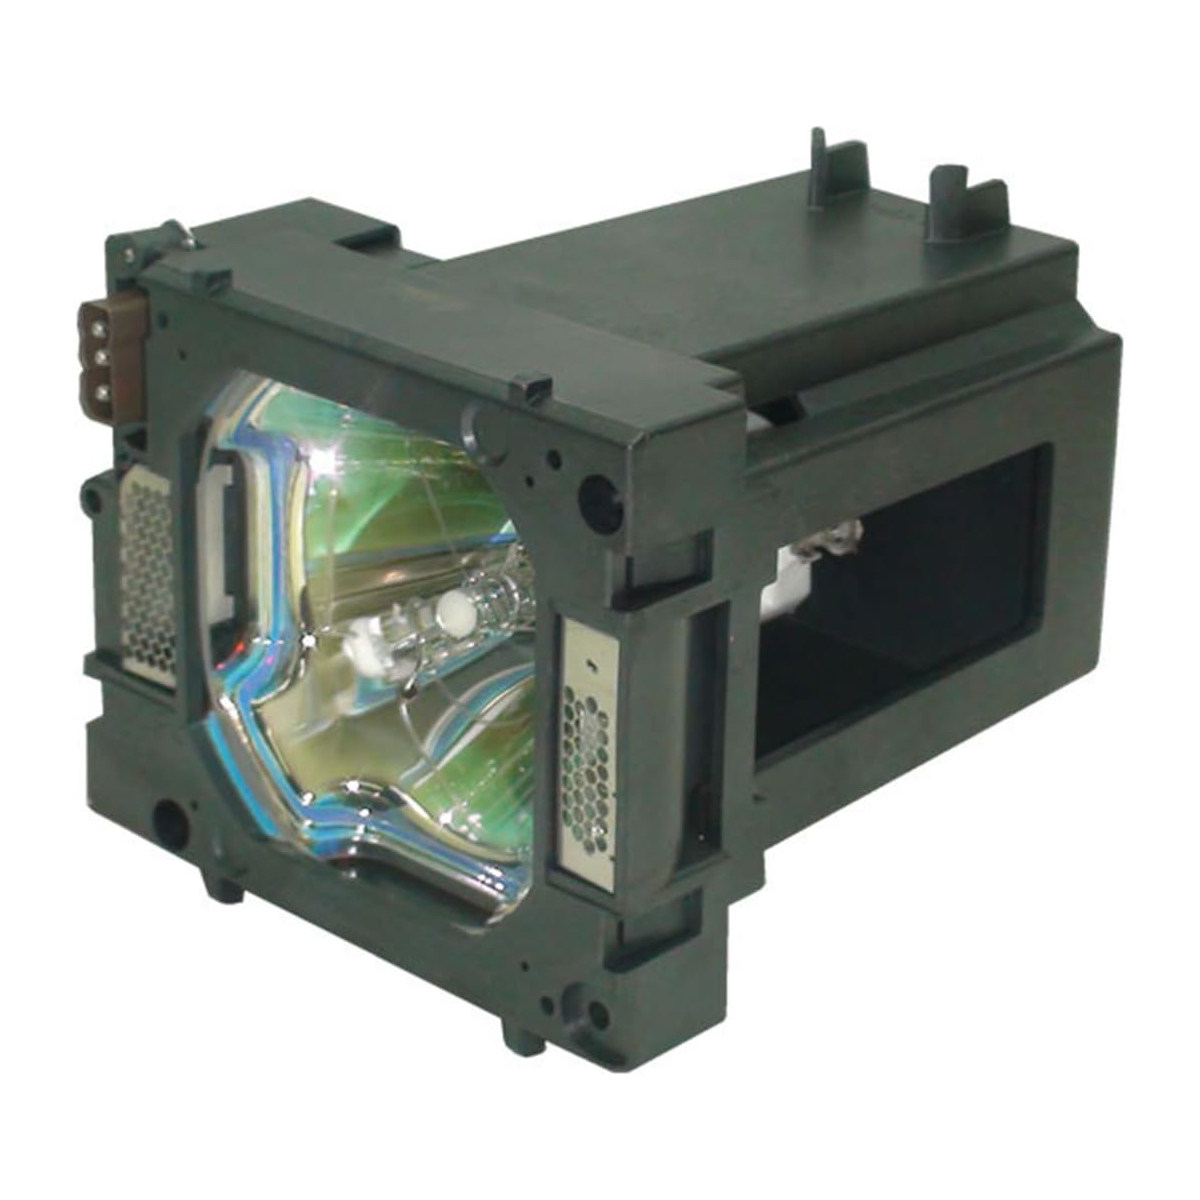 Replacement Projector lamp POA-LMP124 For SANYO PLC-XP200L